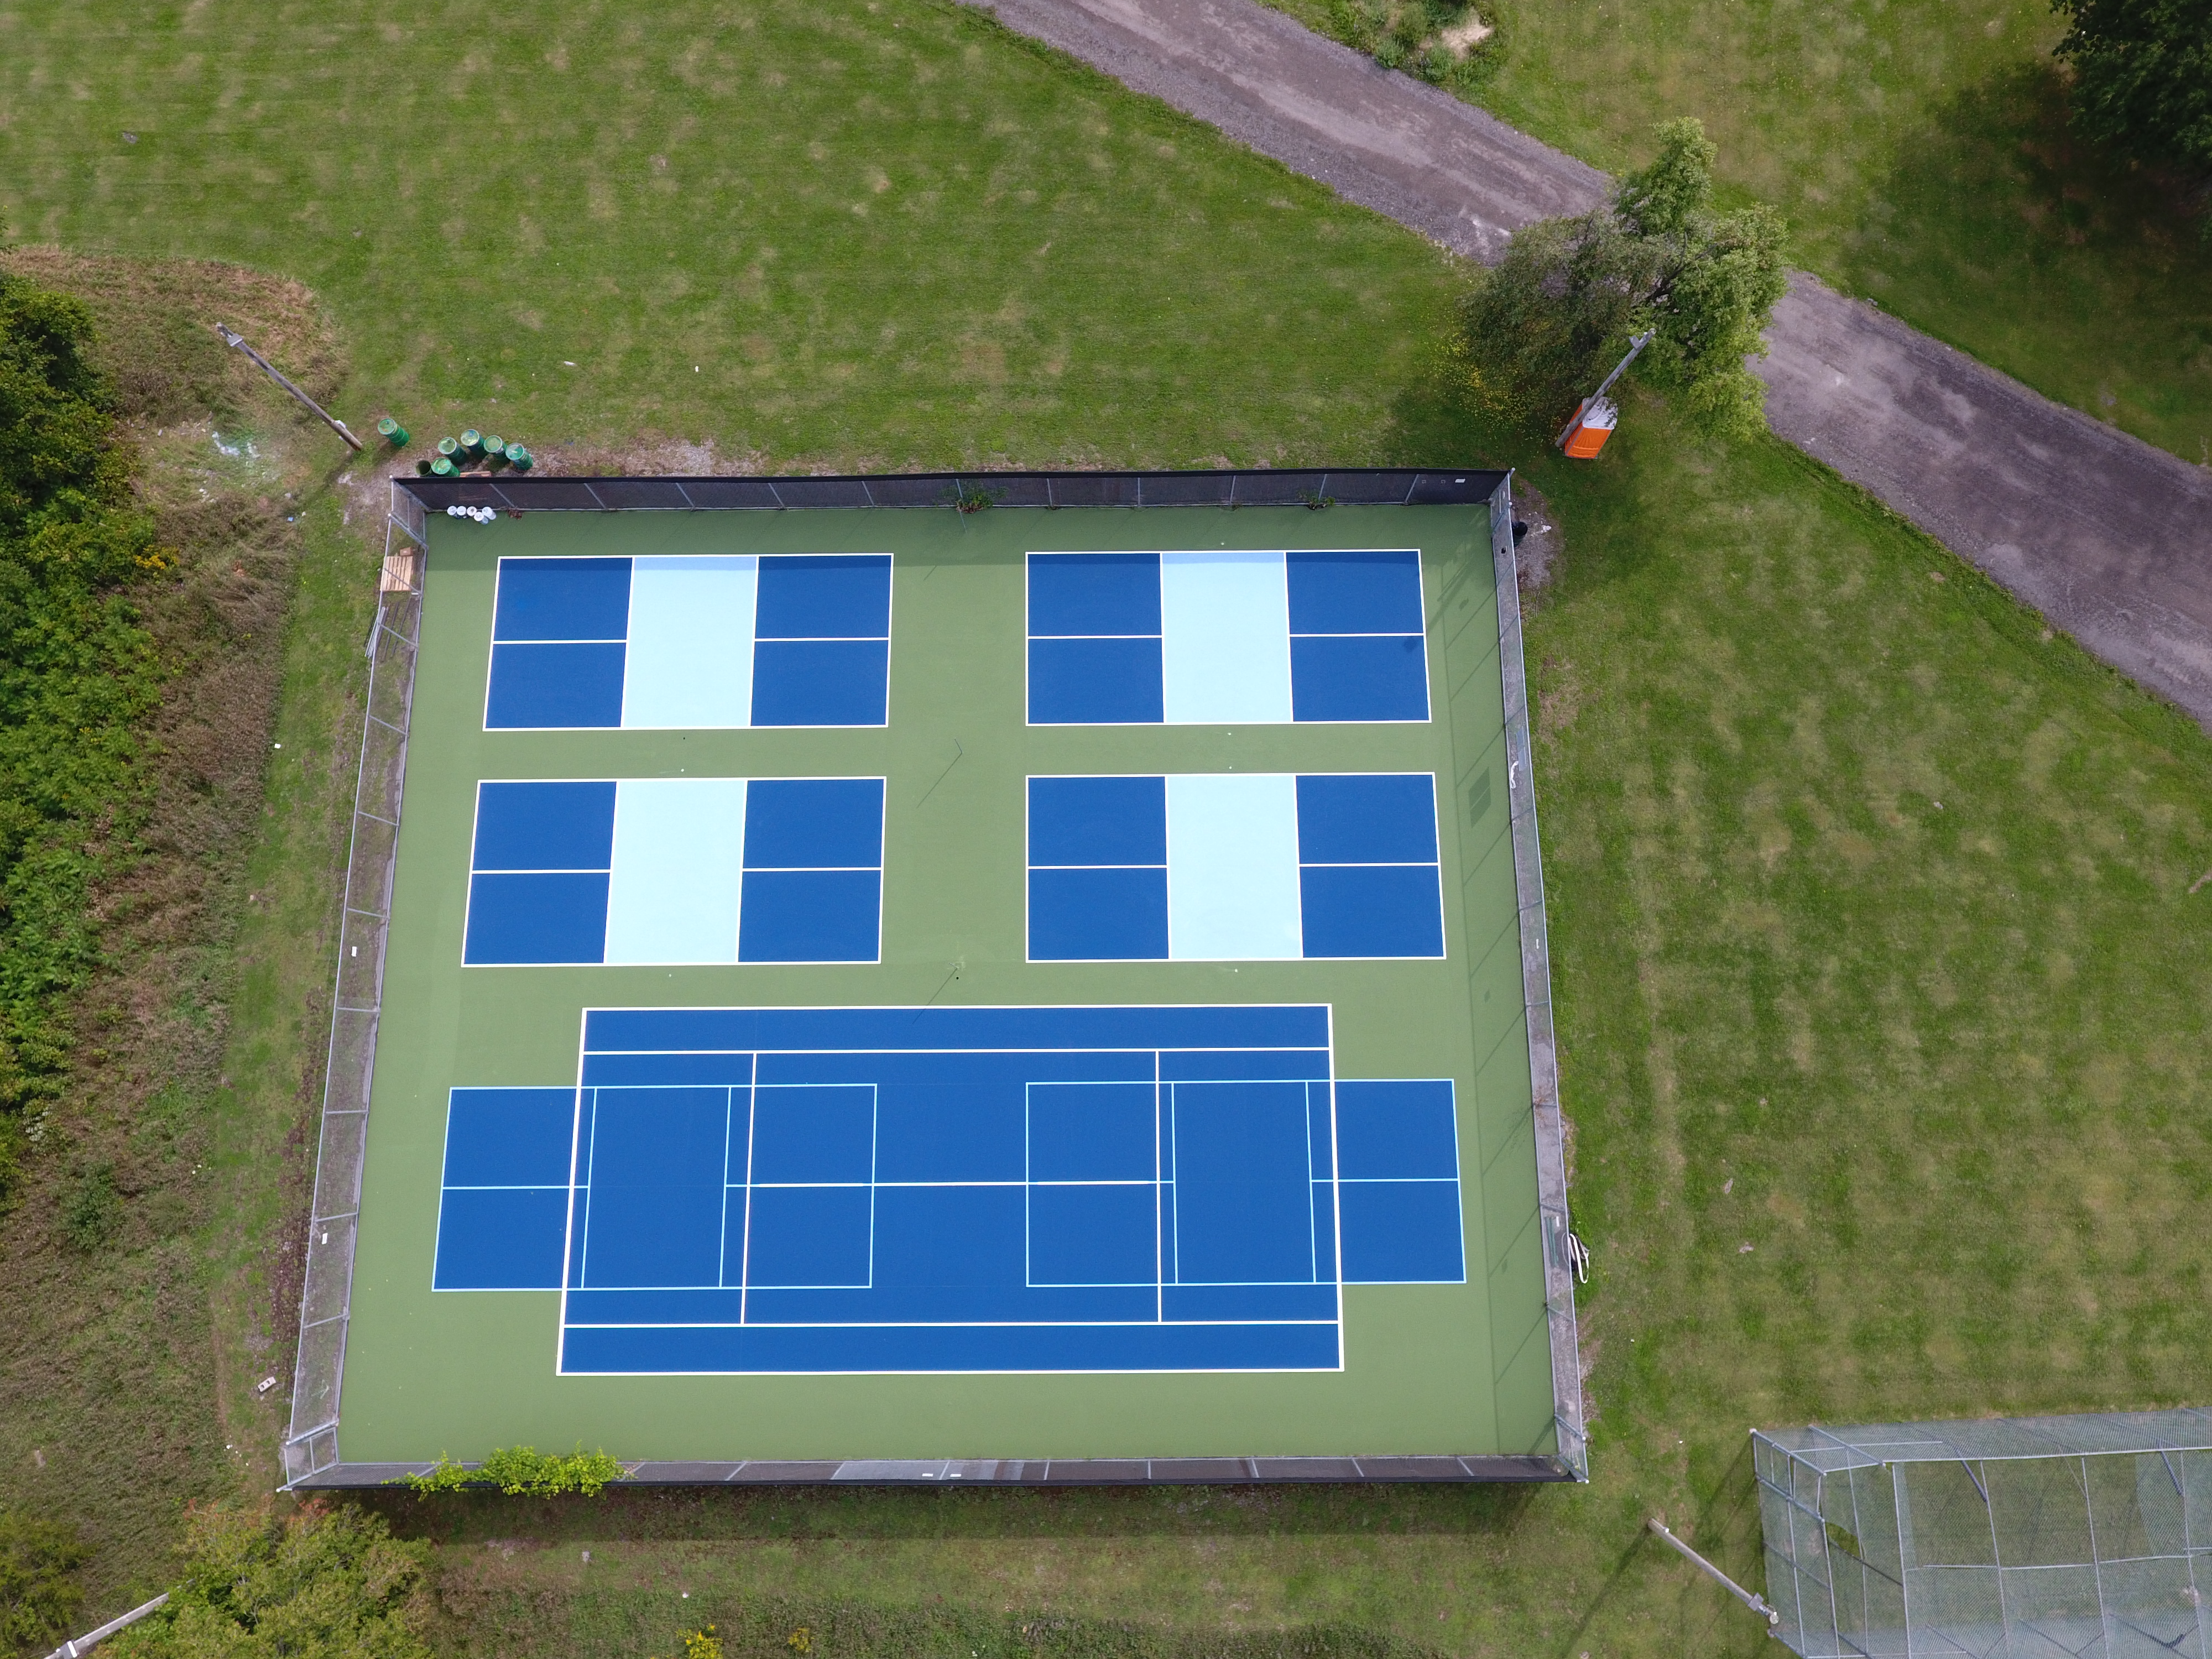 Arial picture of blue and green multi use courts at Gerald Ball Park